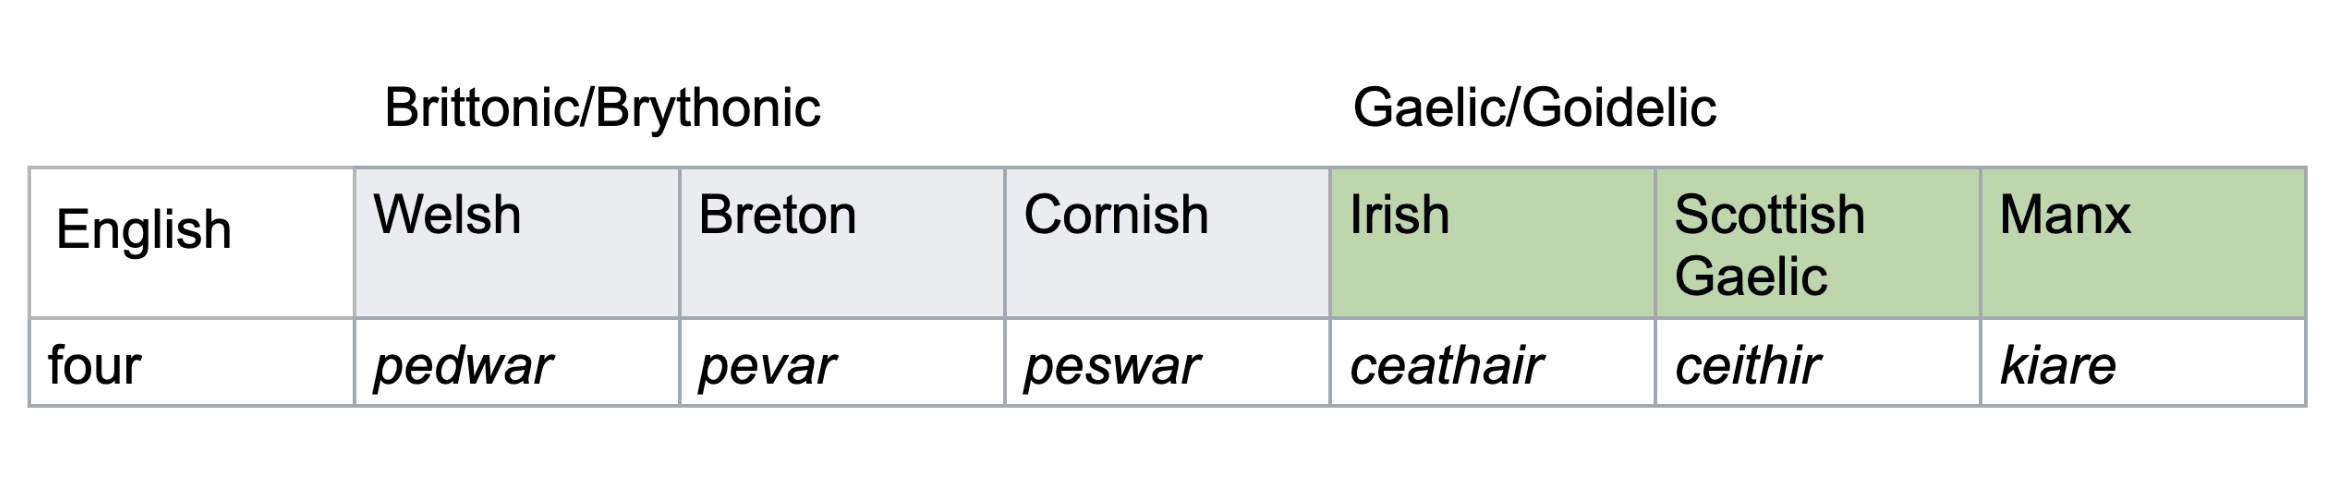 chart showing the different spellings of the number four in different Celtic languages